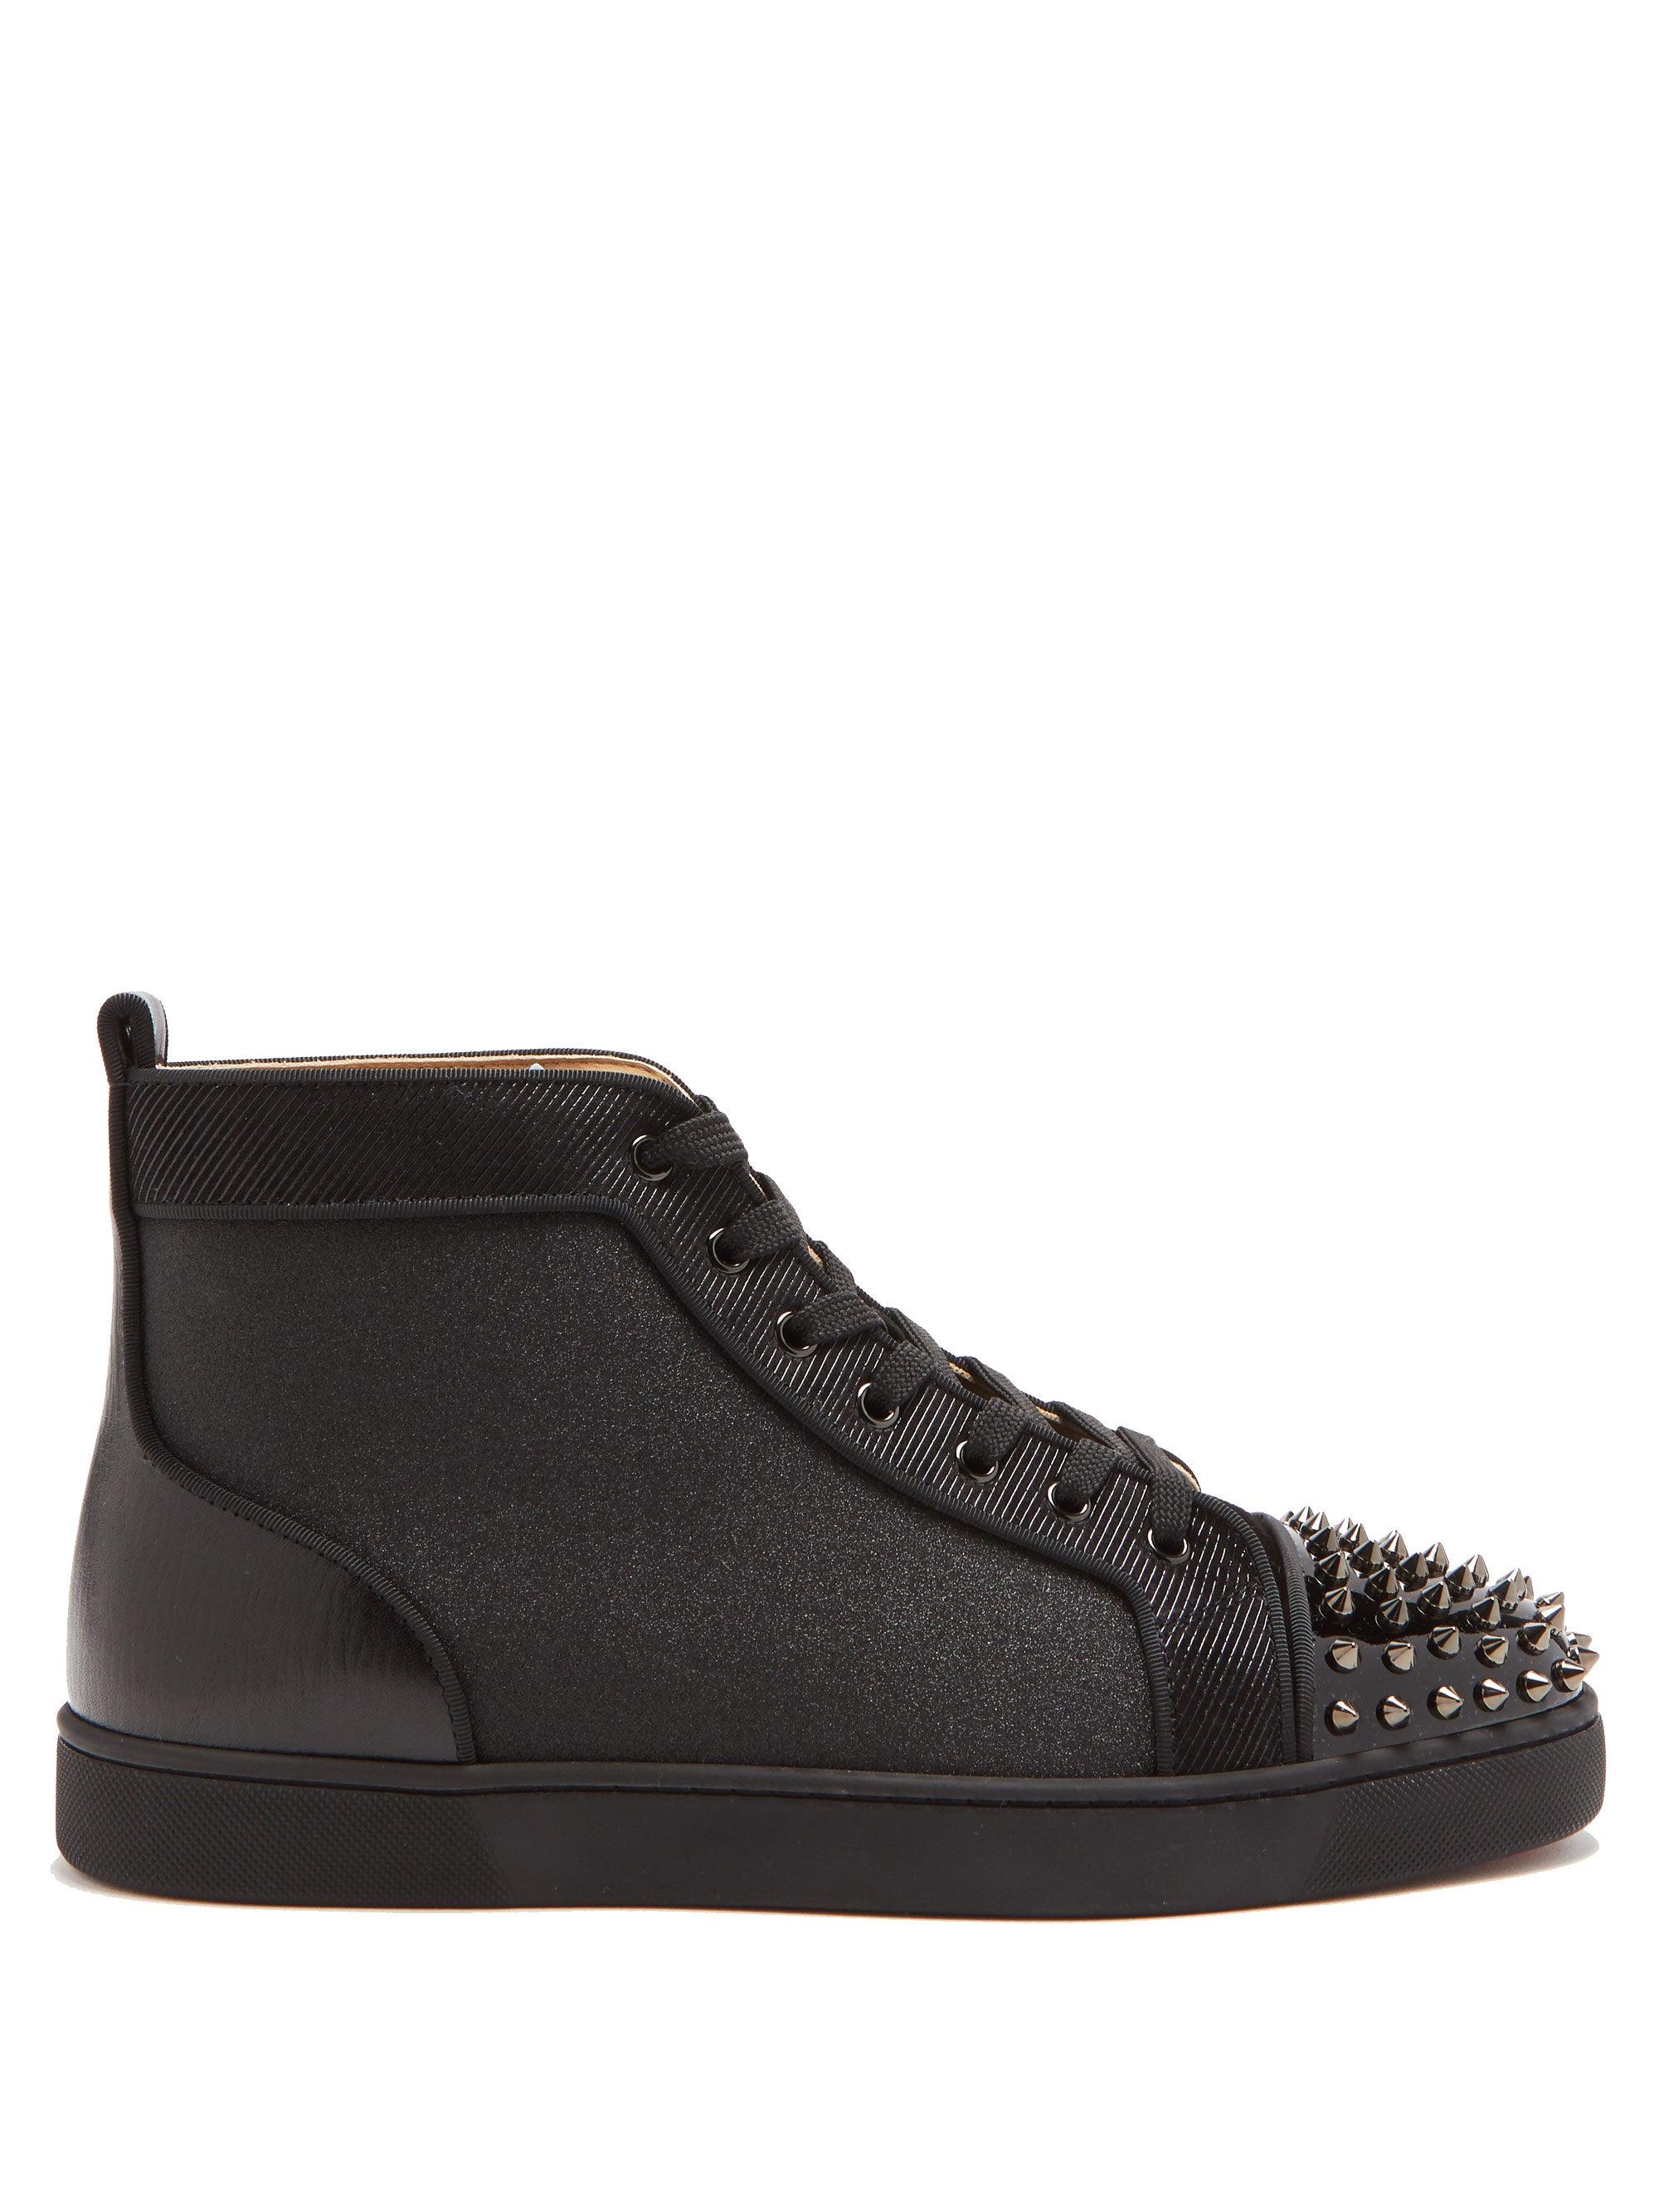 Waterfront fejre sagsøger Christian Louboutin Leather Orlato High Top Sneakers in Black for Men -  Save 10% - Lyst